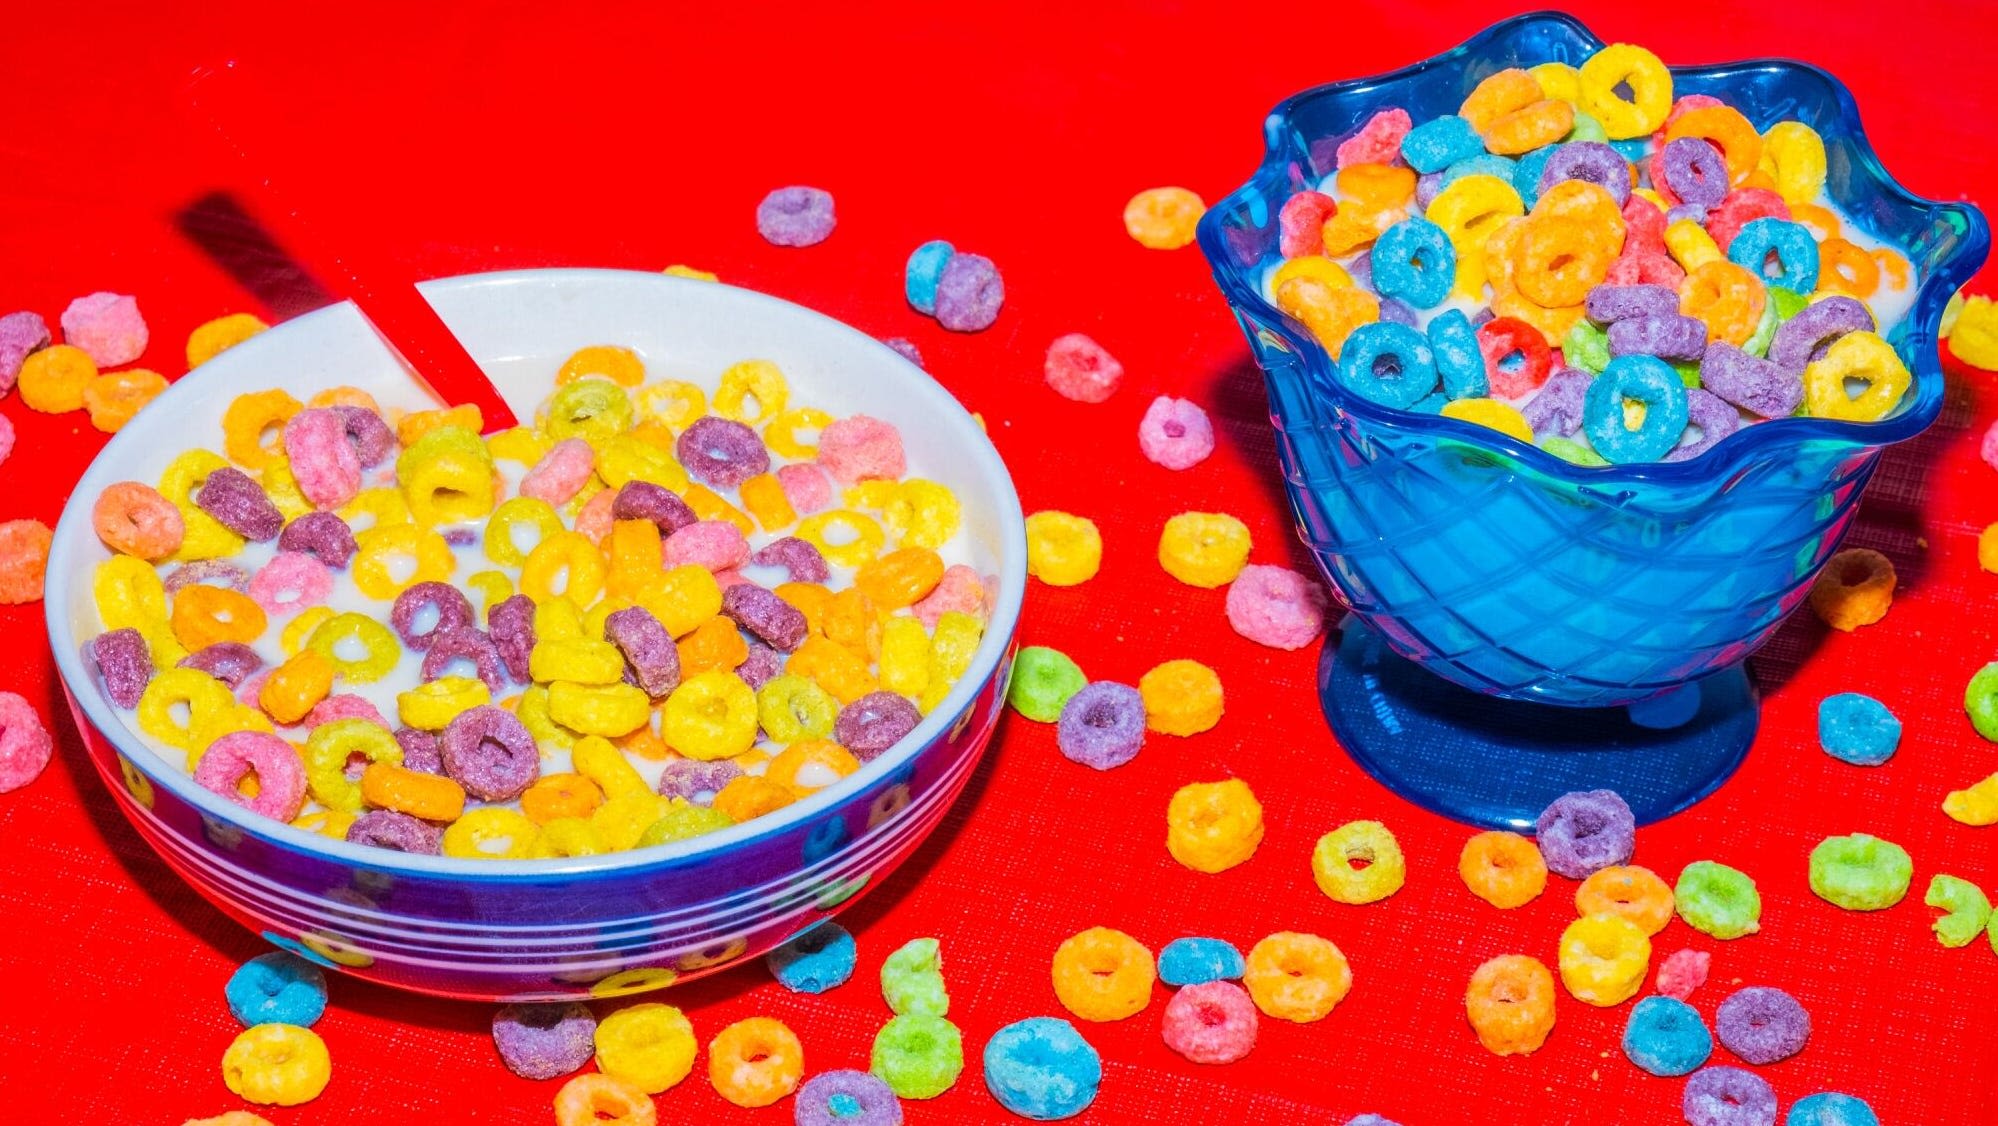 A hill to dye on? Kellogg resists giving up bright Froot Loop colors amid new regulations